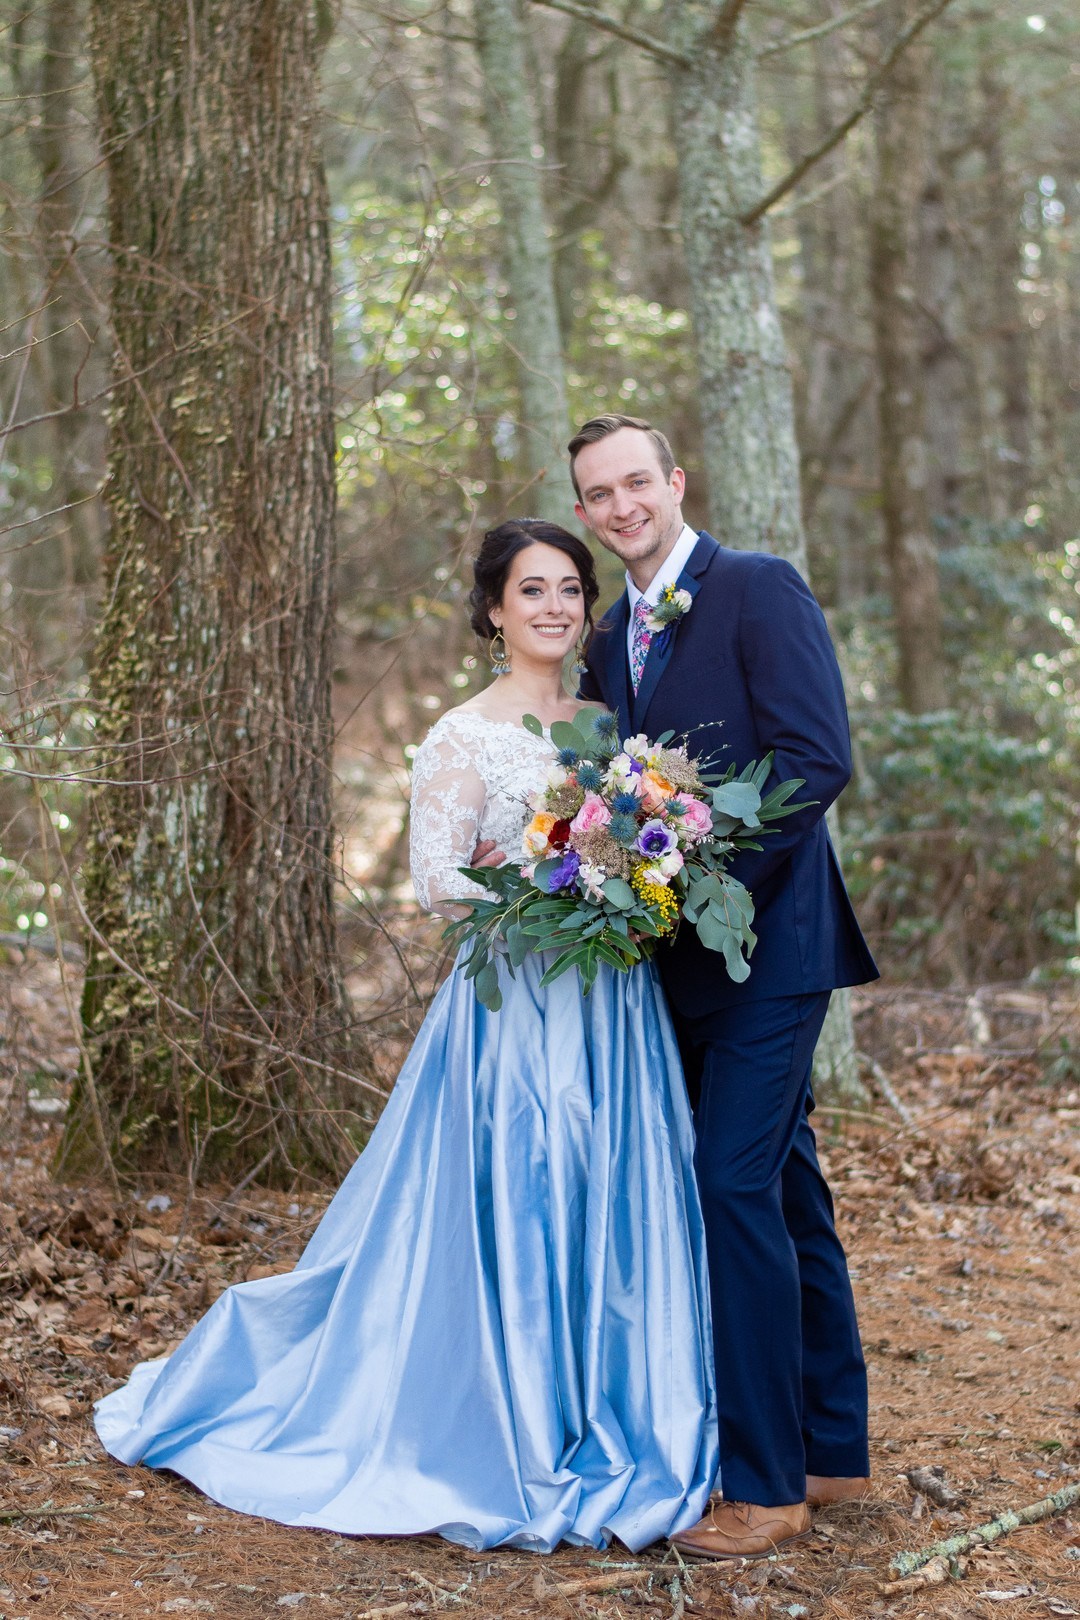 The bride was wearing a white lace off the shoulder top and a blue full skirt, the groom was wearing a bright blue suit with a colorful floral tie